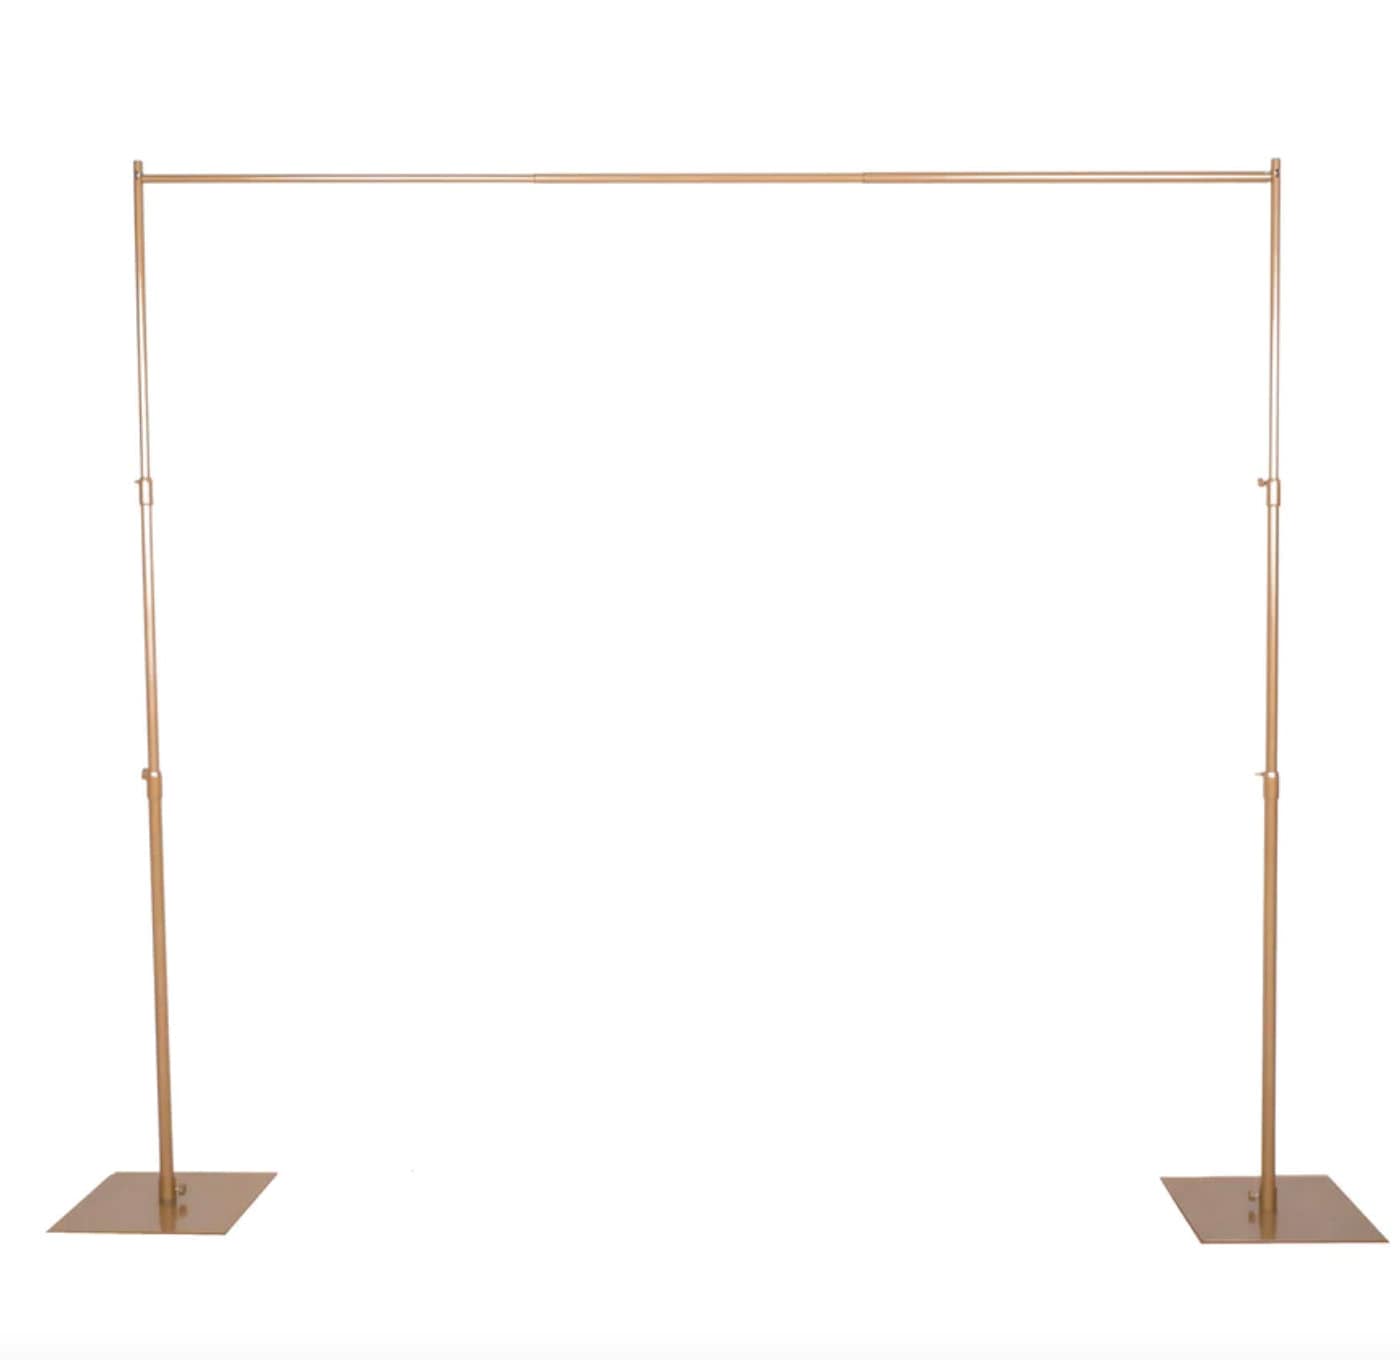 10 FT. Gold Adjustable Heavy Duty Backdrop Stand Kit Steel Base Photography Studio Equipment Photo Booth Interview Portrait Picture PVC